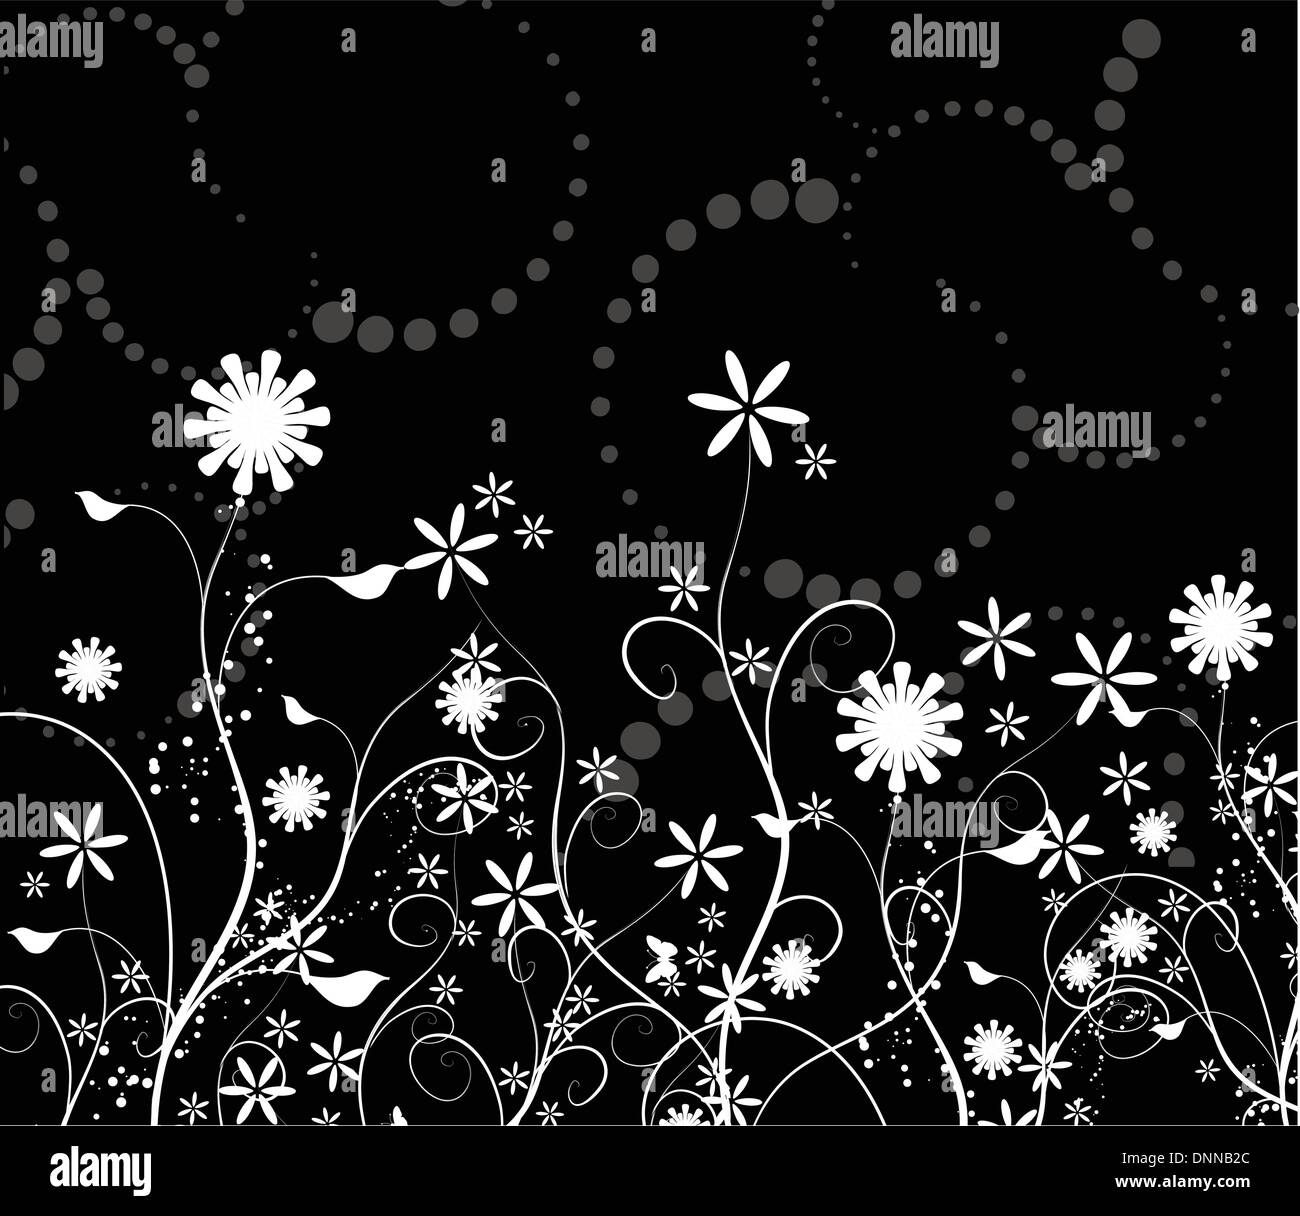 Abstract floral background Stock Vector